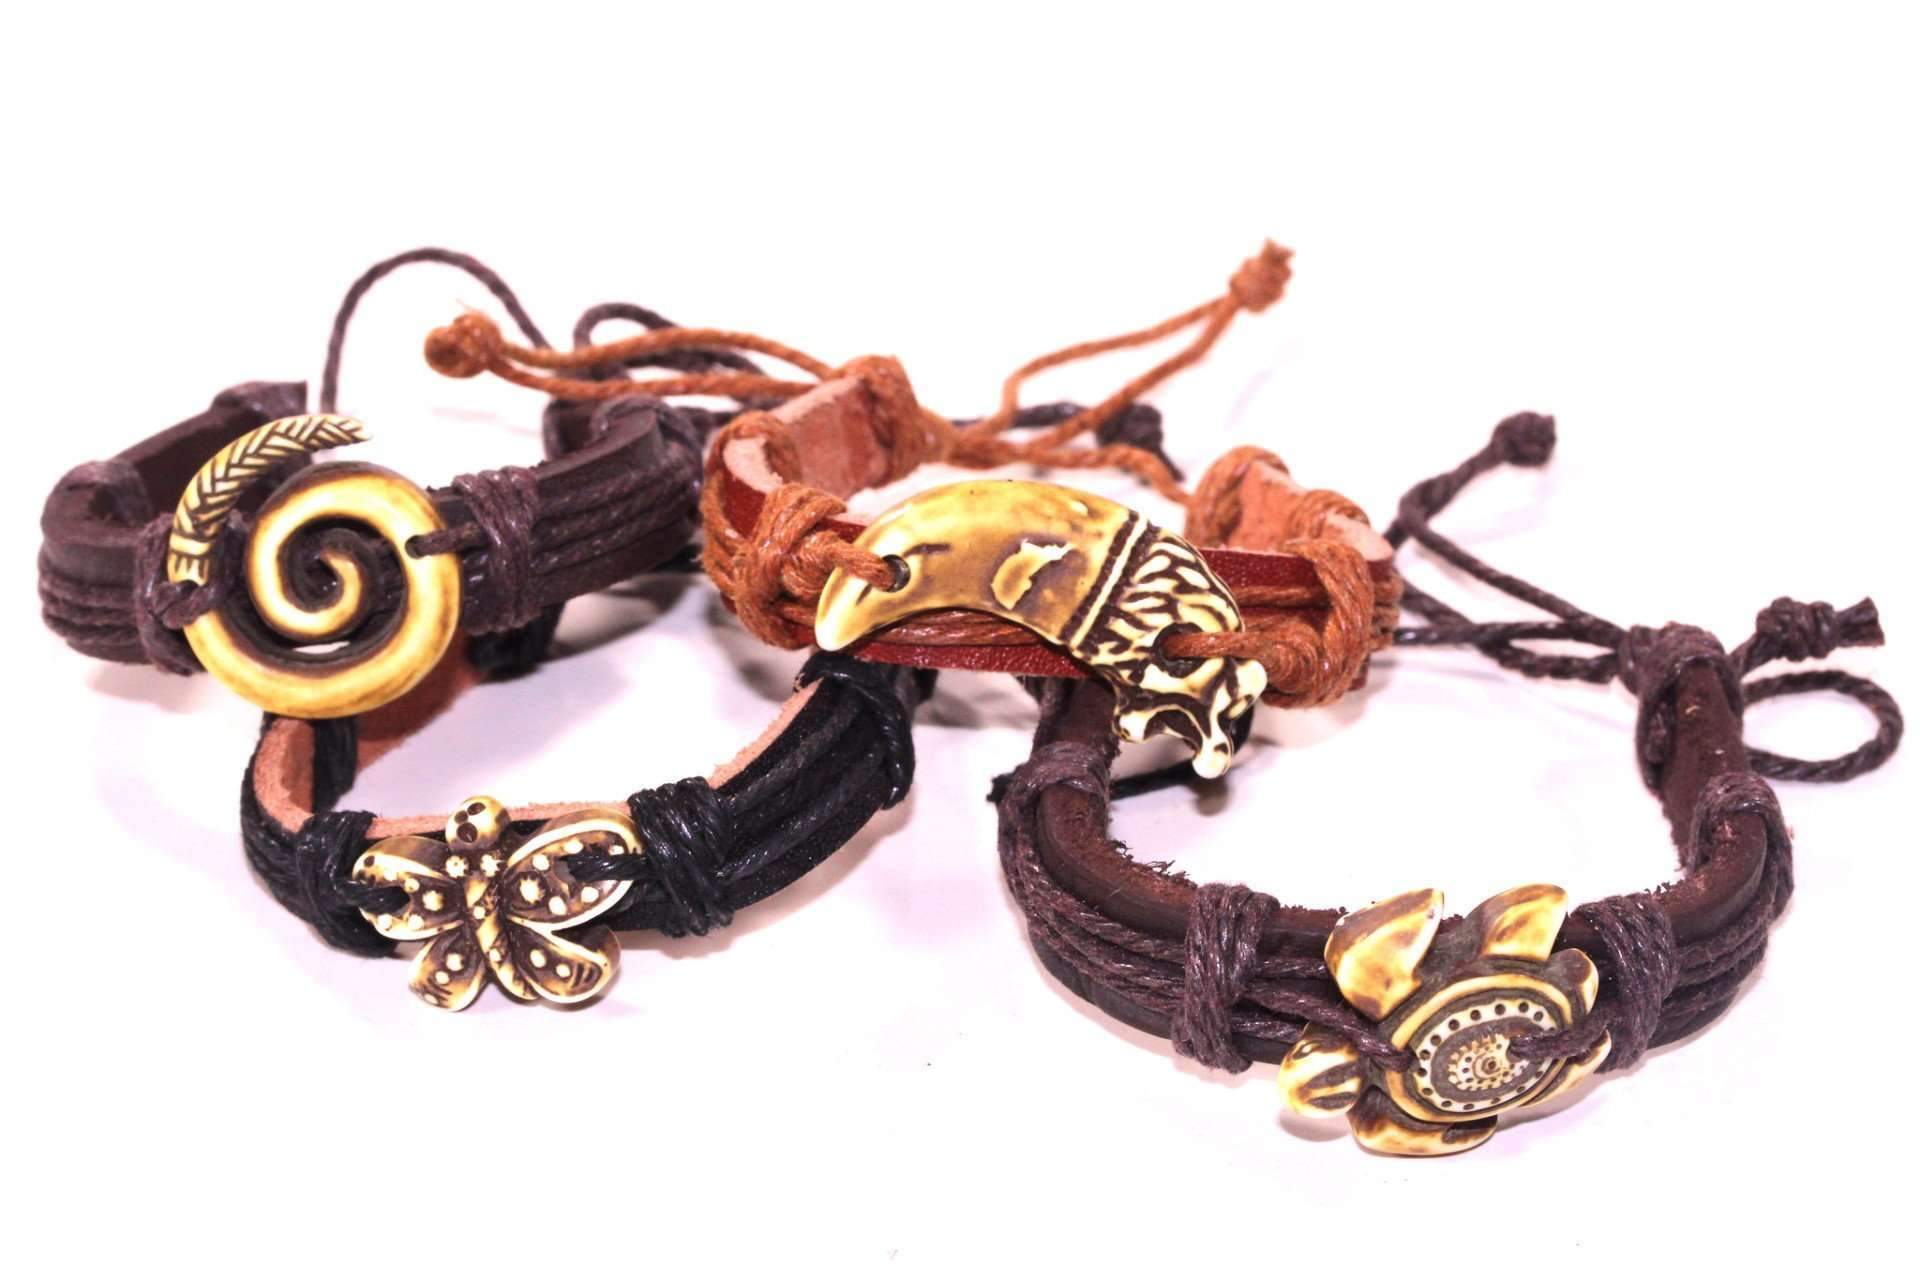 Handmade Tribal Style Leather Bracelet with Animal and Symbol Carvings - Adjustable Chord Closure - Jewelry & Watches - Bijou Her -  -  - 